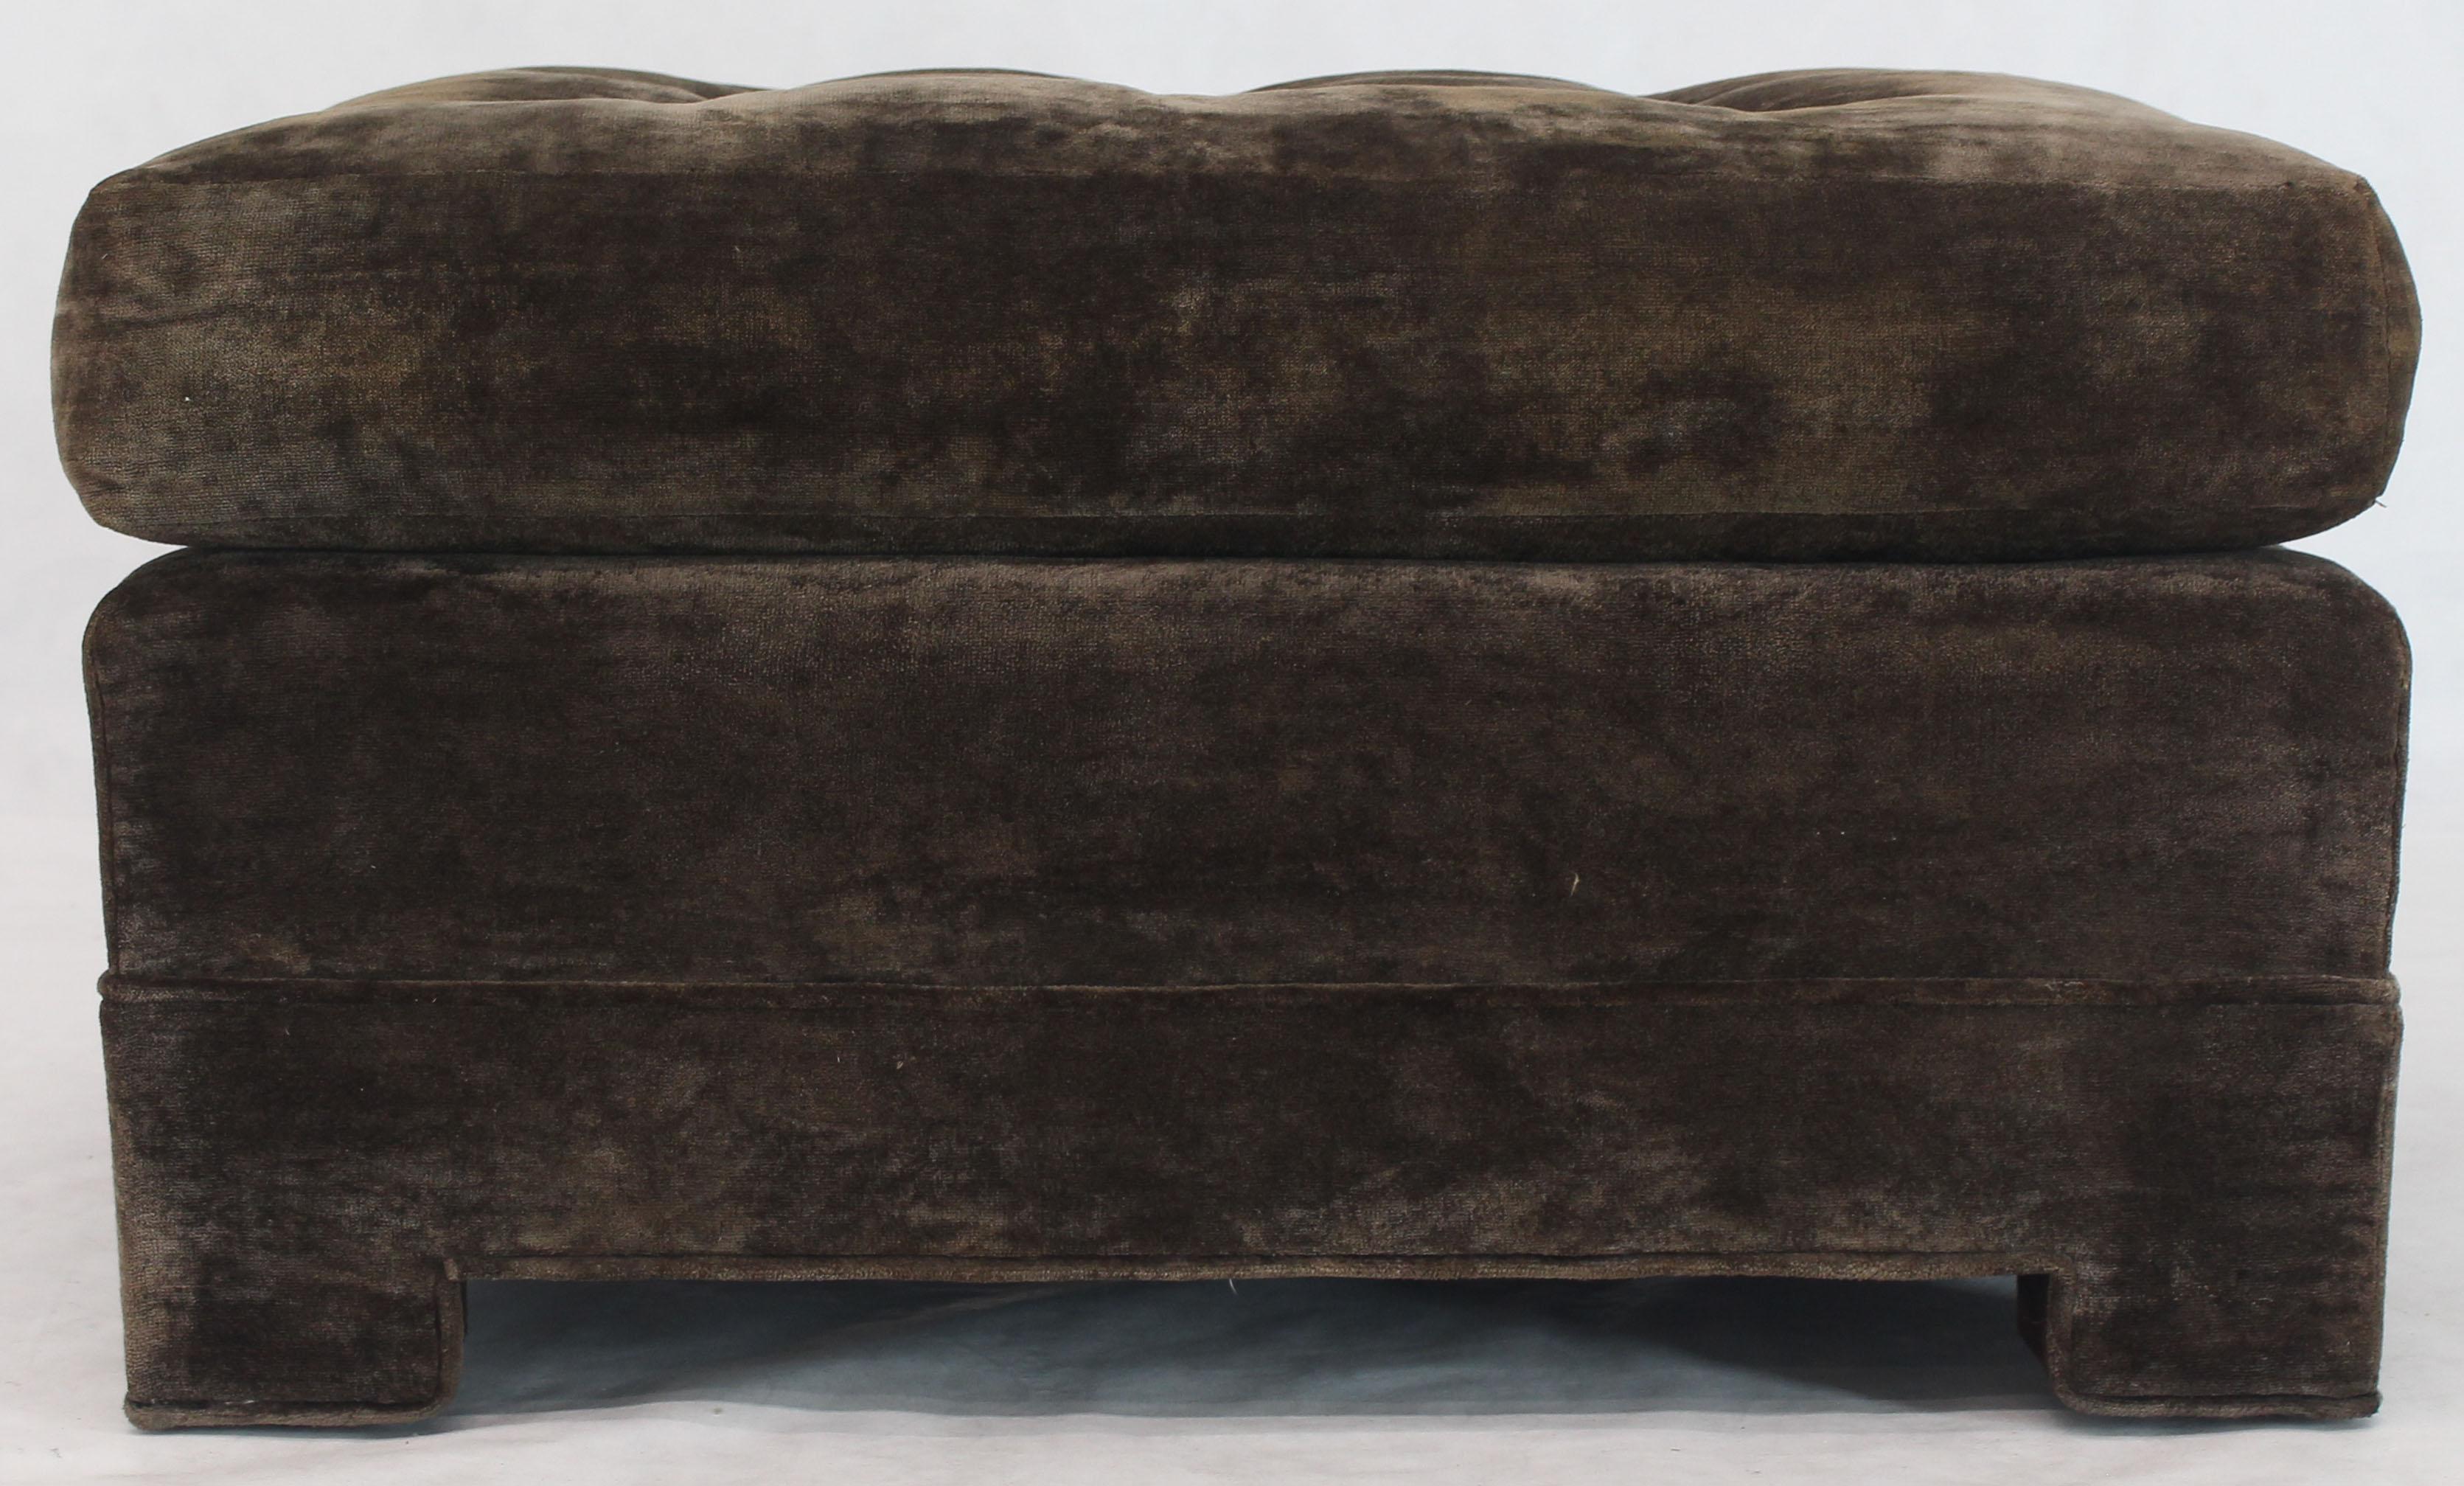 Large Square Deep Bronze Velvet Upholstery Tufted Upholstery Ottoman Footstool In Excellent Condition For Sale In Rockaway, NJ